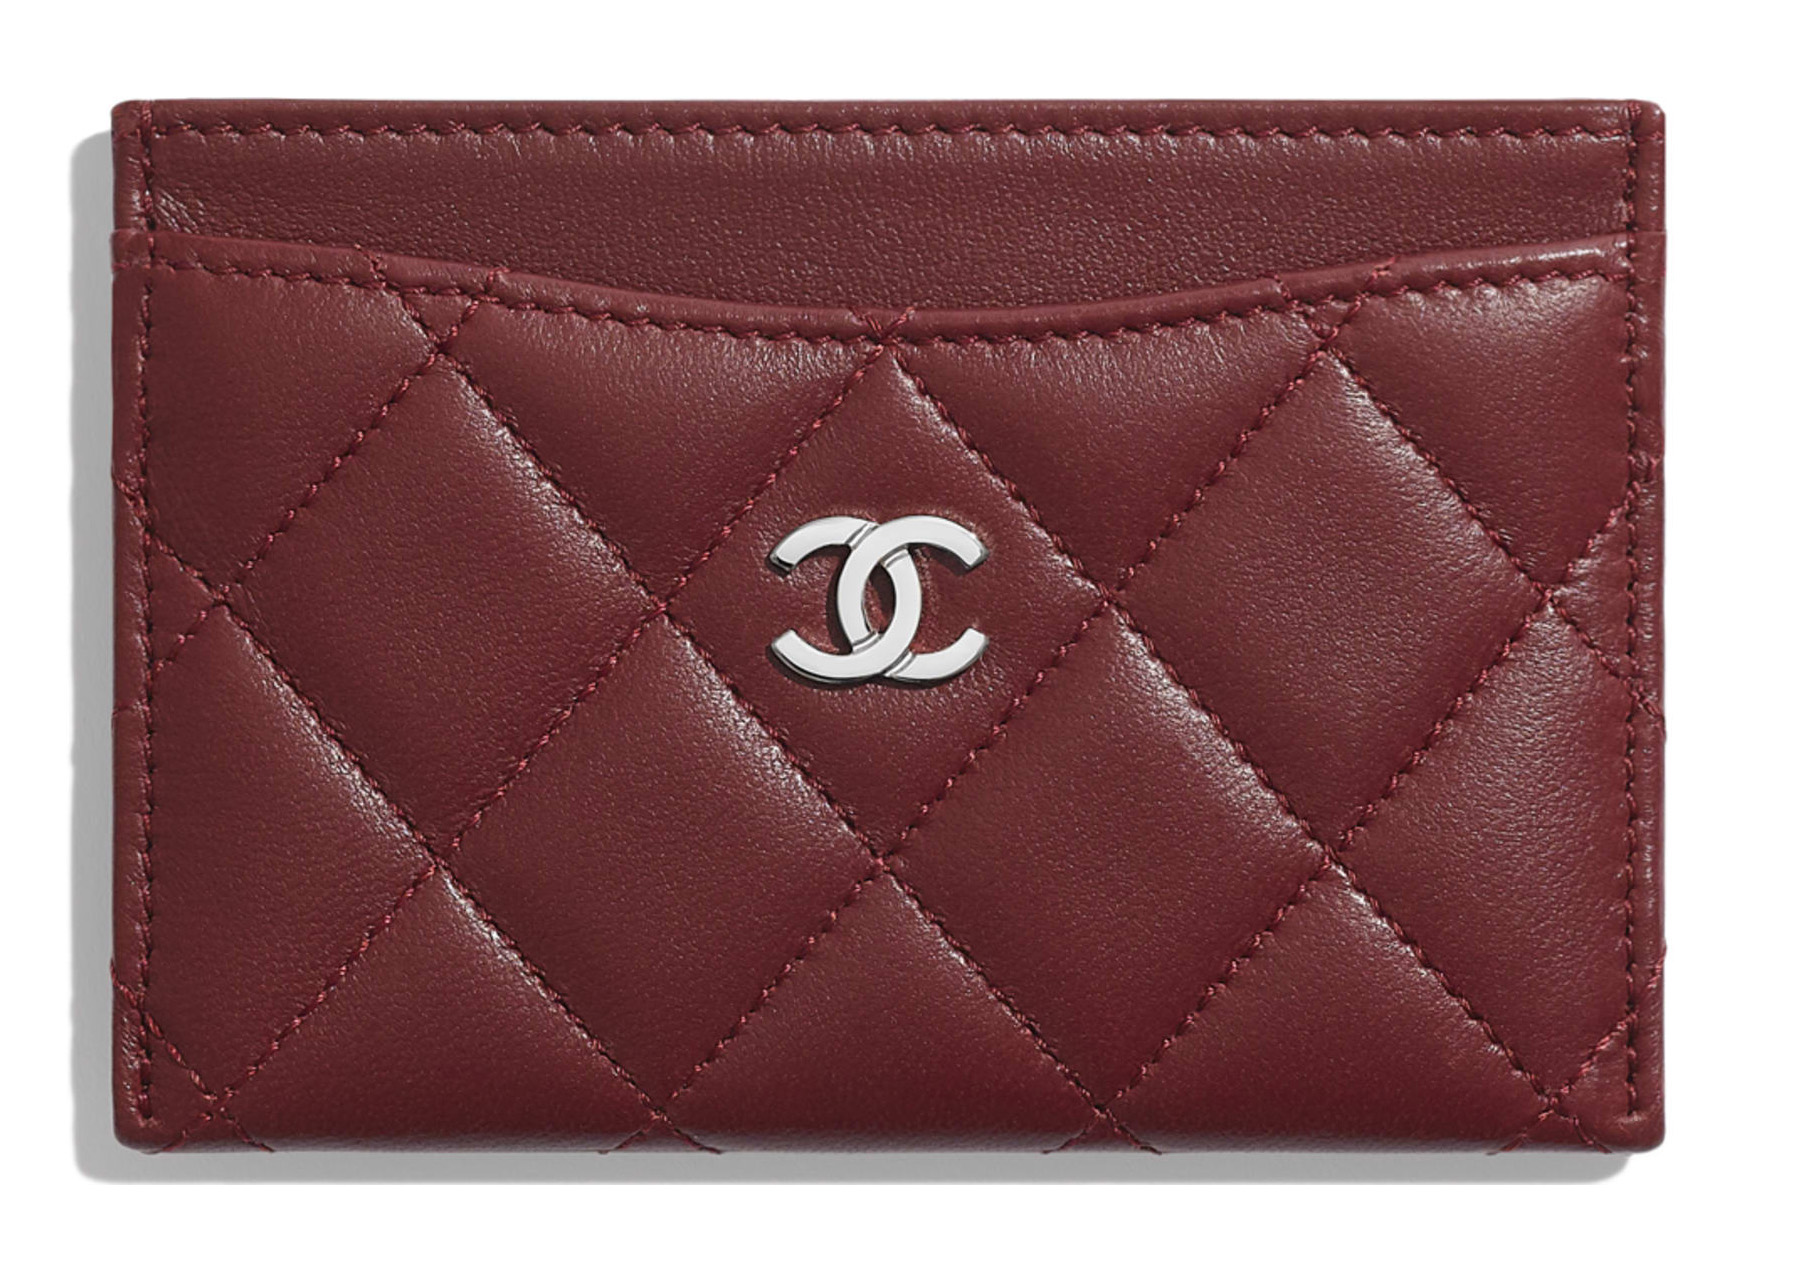 Chanel Classic Card Holder Quilted Silver-tone Black in Lambskin 